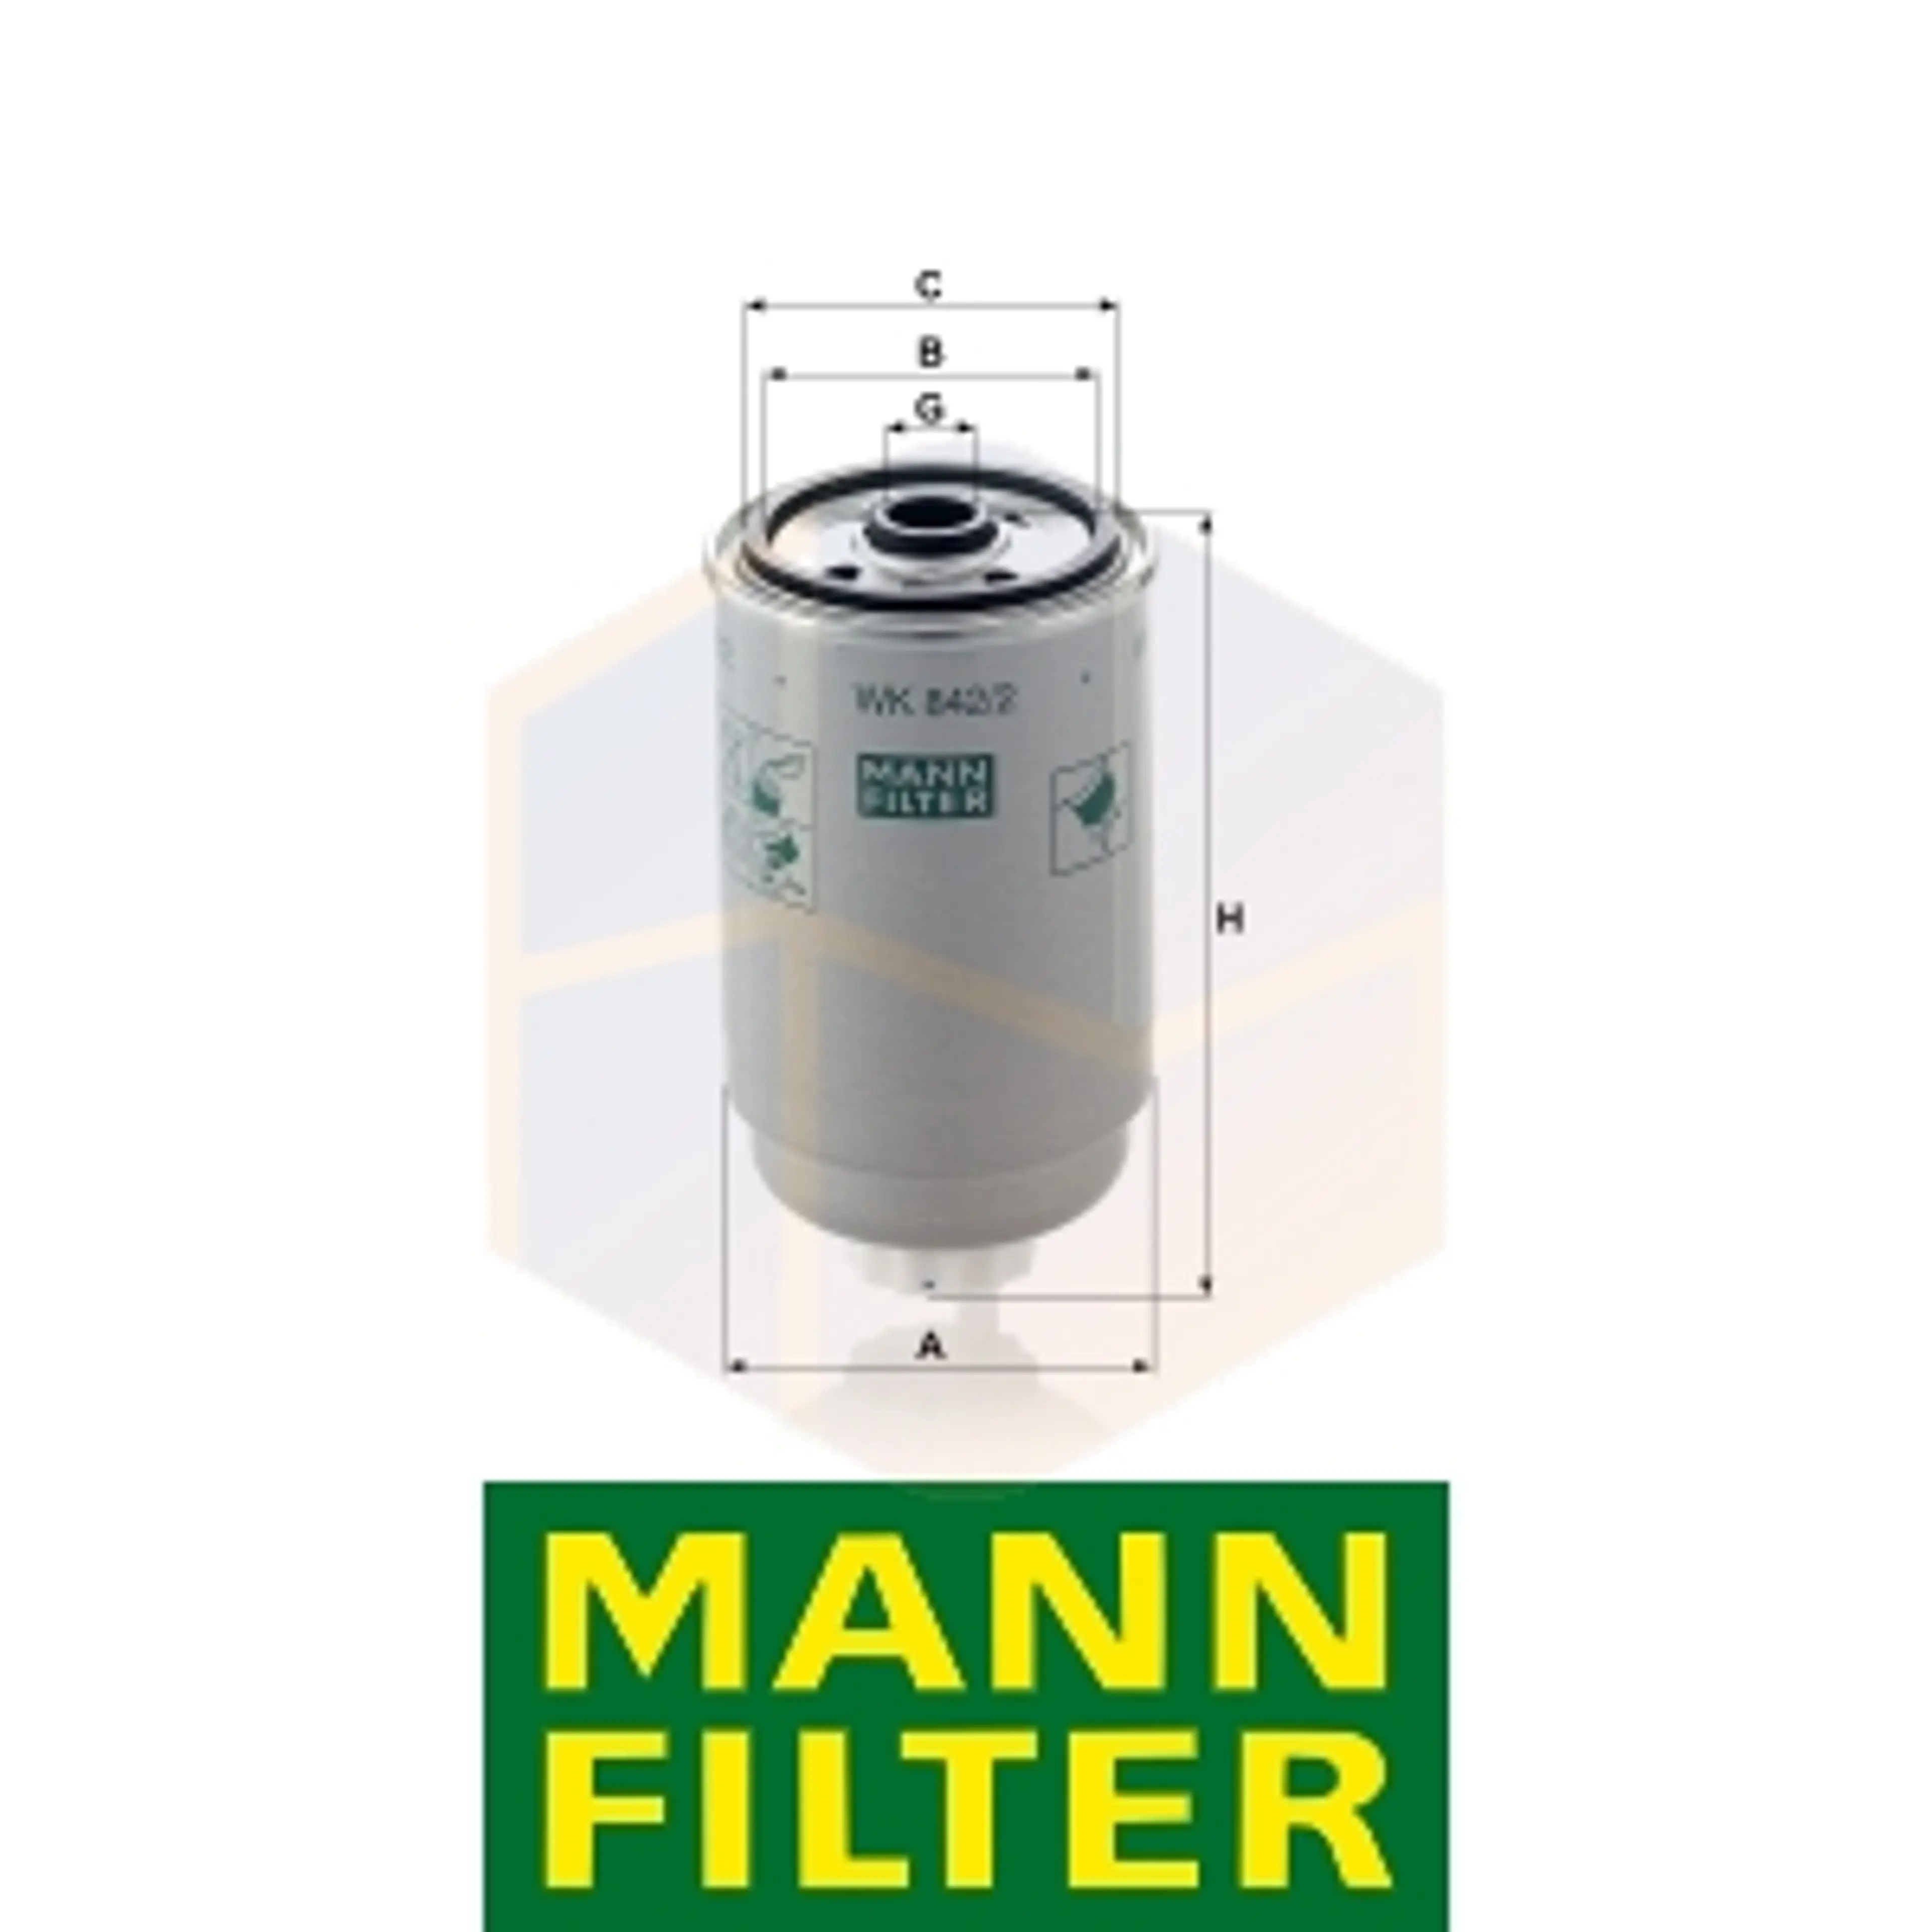 FILTRO COMBUSTIBLE WK 842/2 MANN